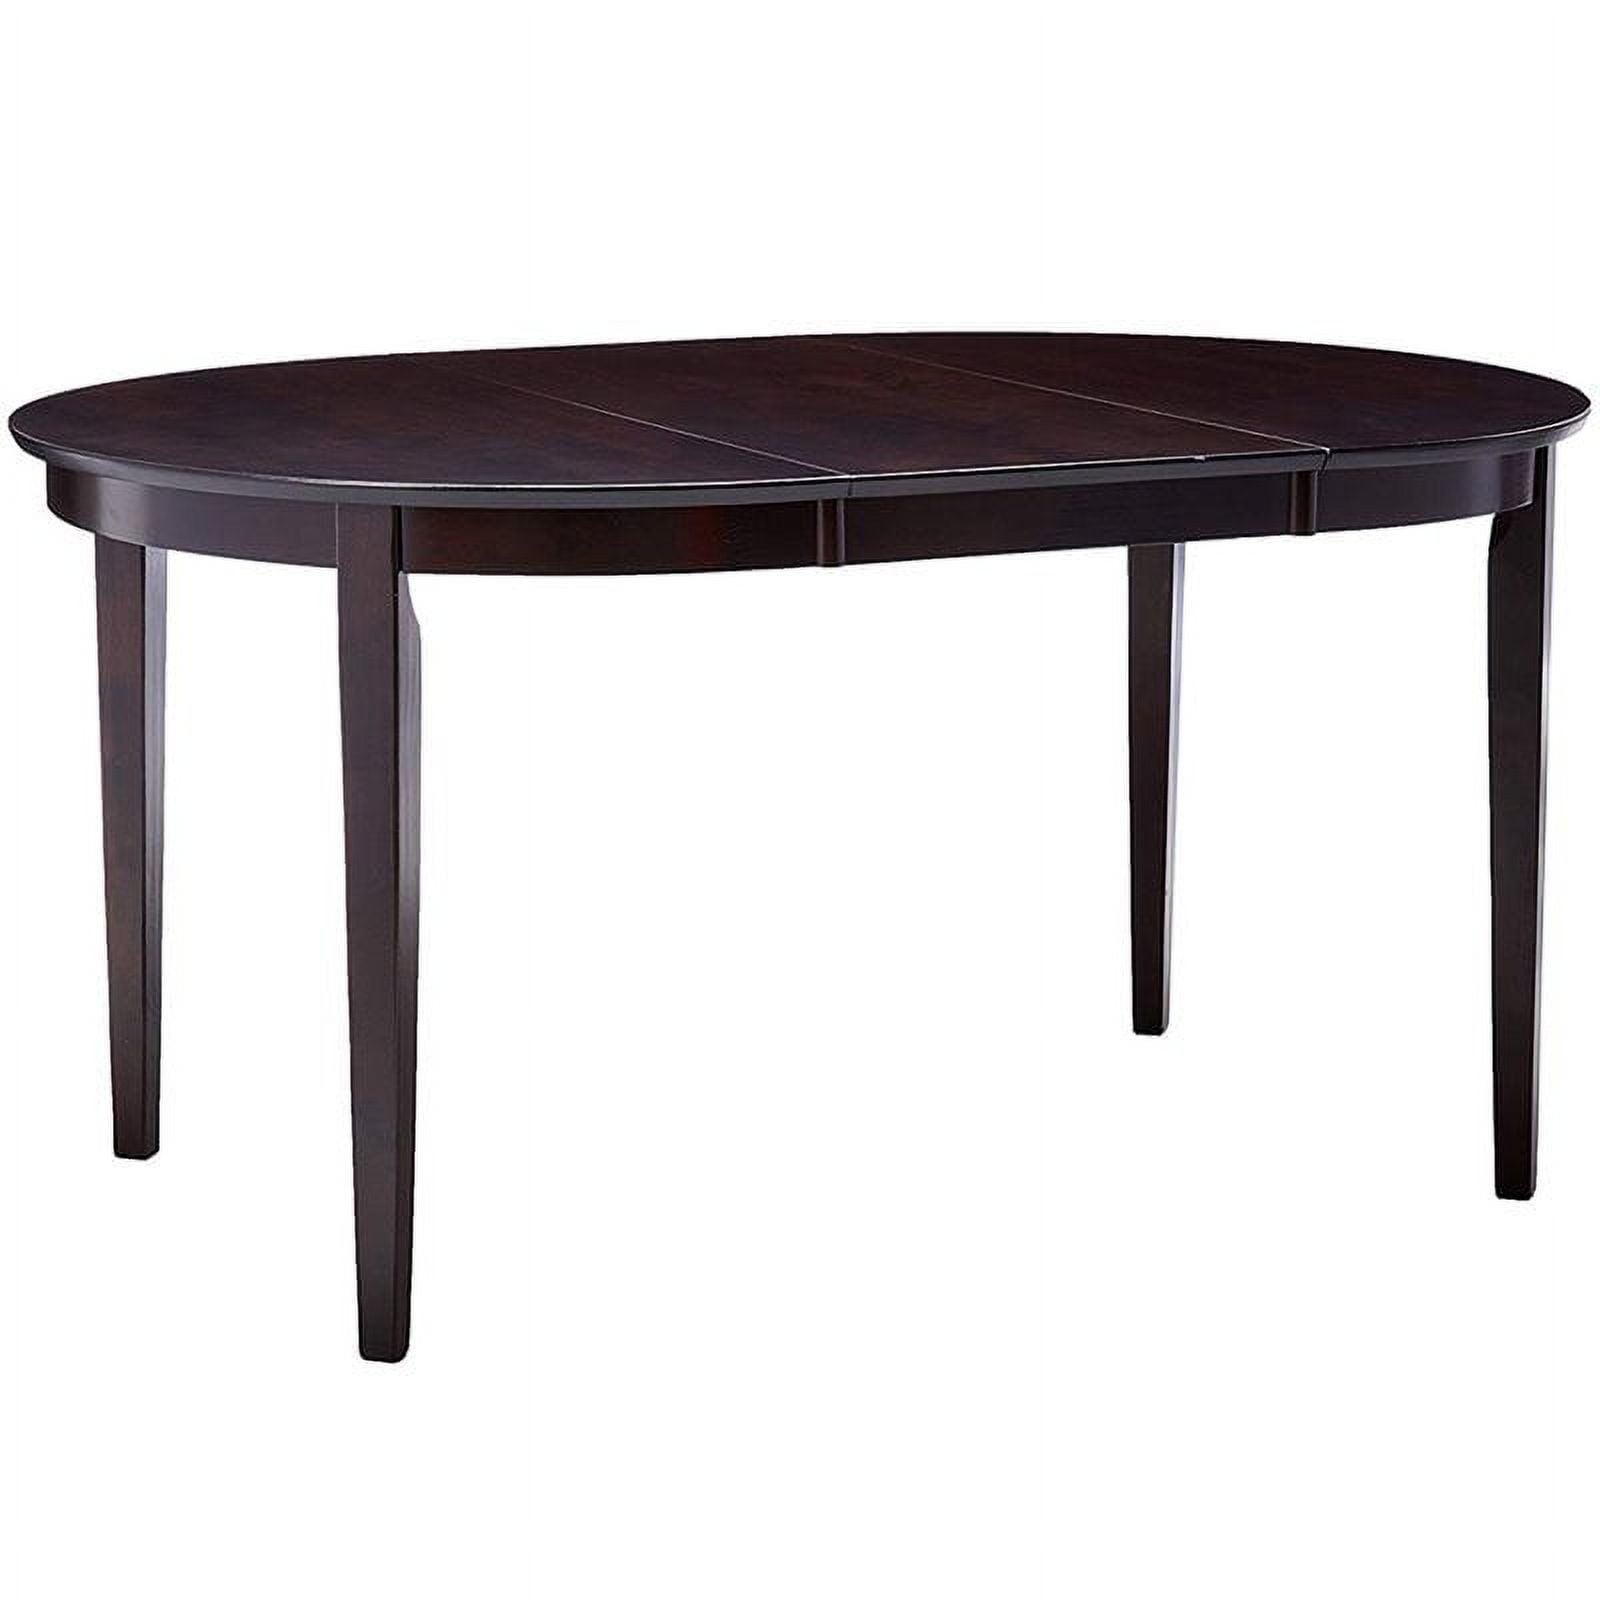 Transitional Extendable Oval Dining Table in Rich Cappuccino